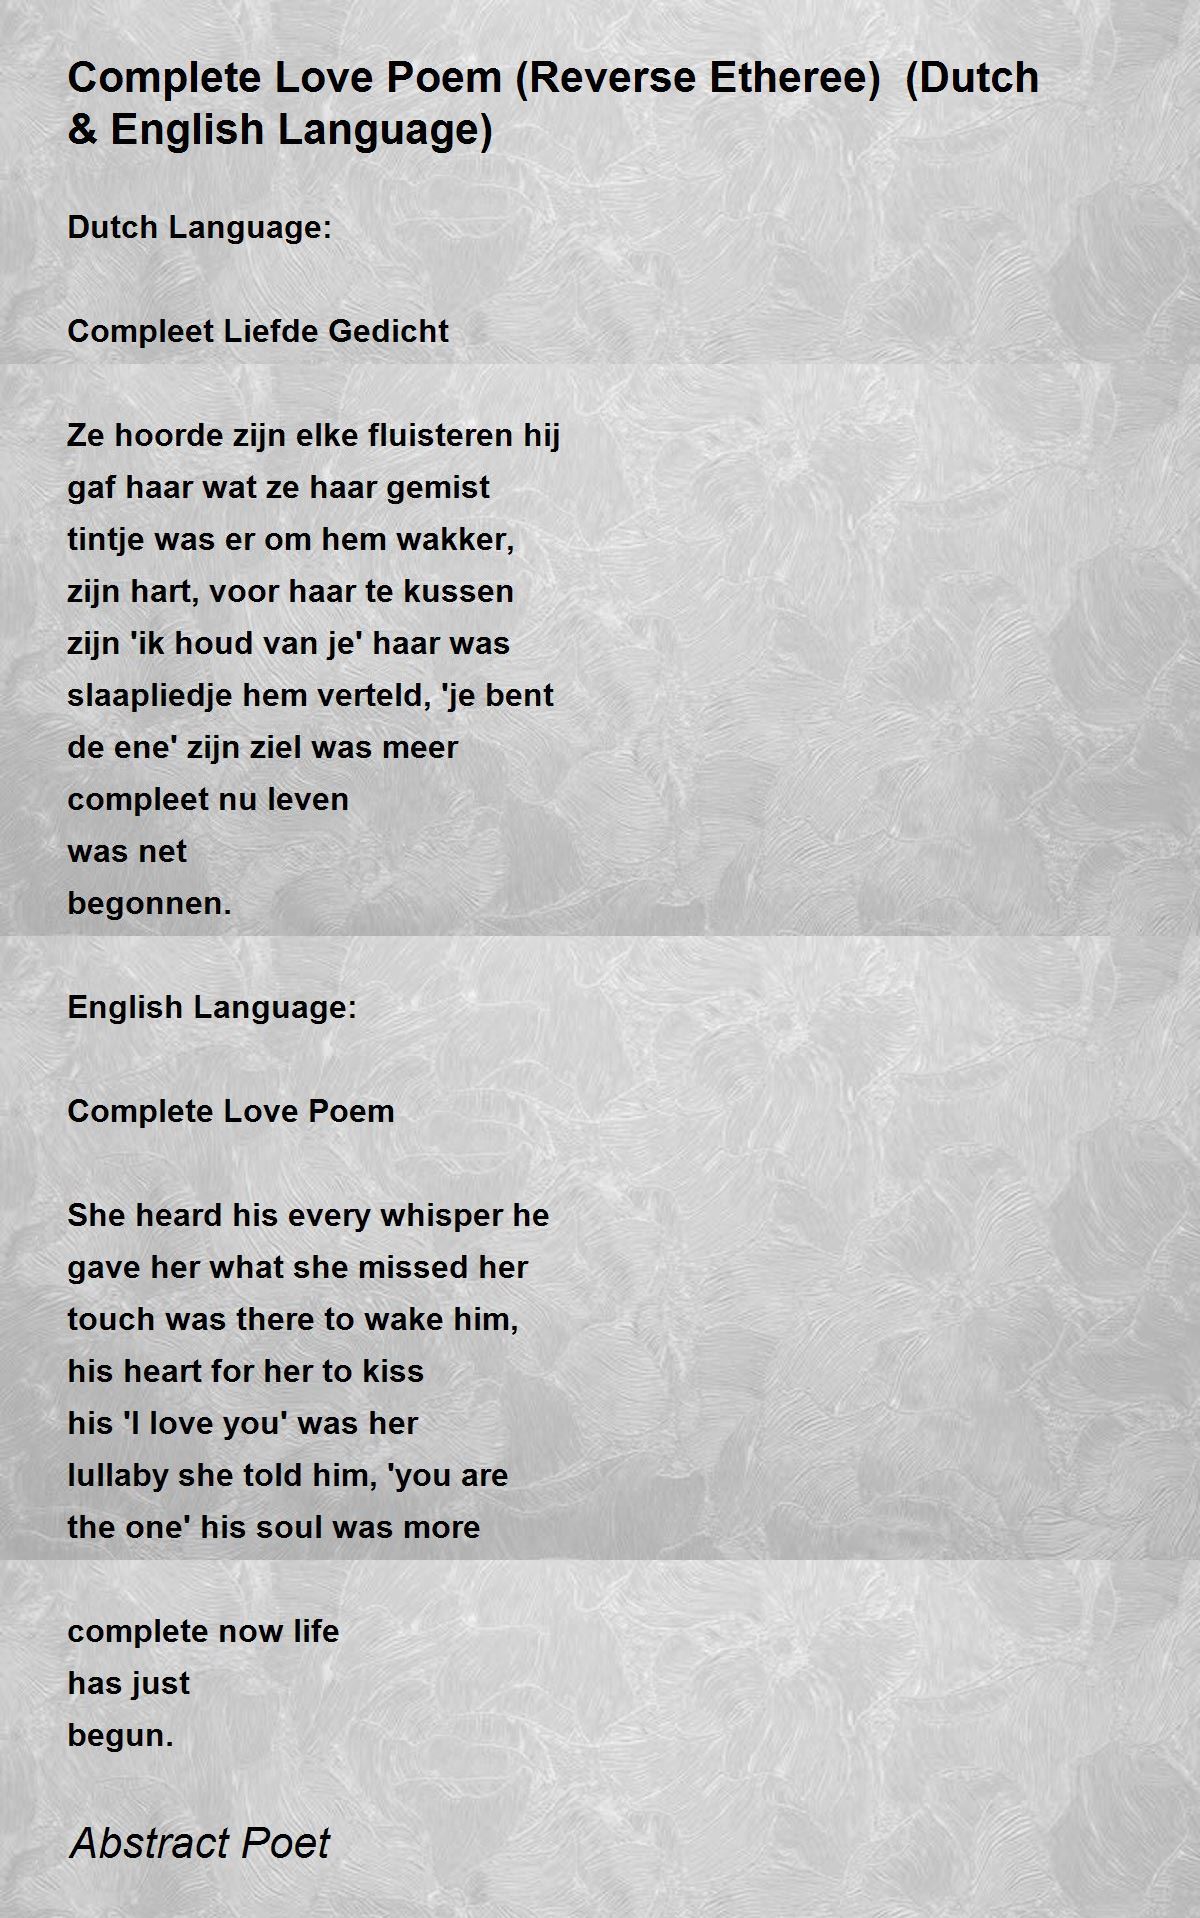 Complete Love Poem (Reverse Etheree) (Dutch & Language) - Complete Love Poem Etheree) (Dutch & English Language) Poem by Abstract Poet